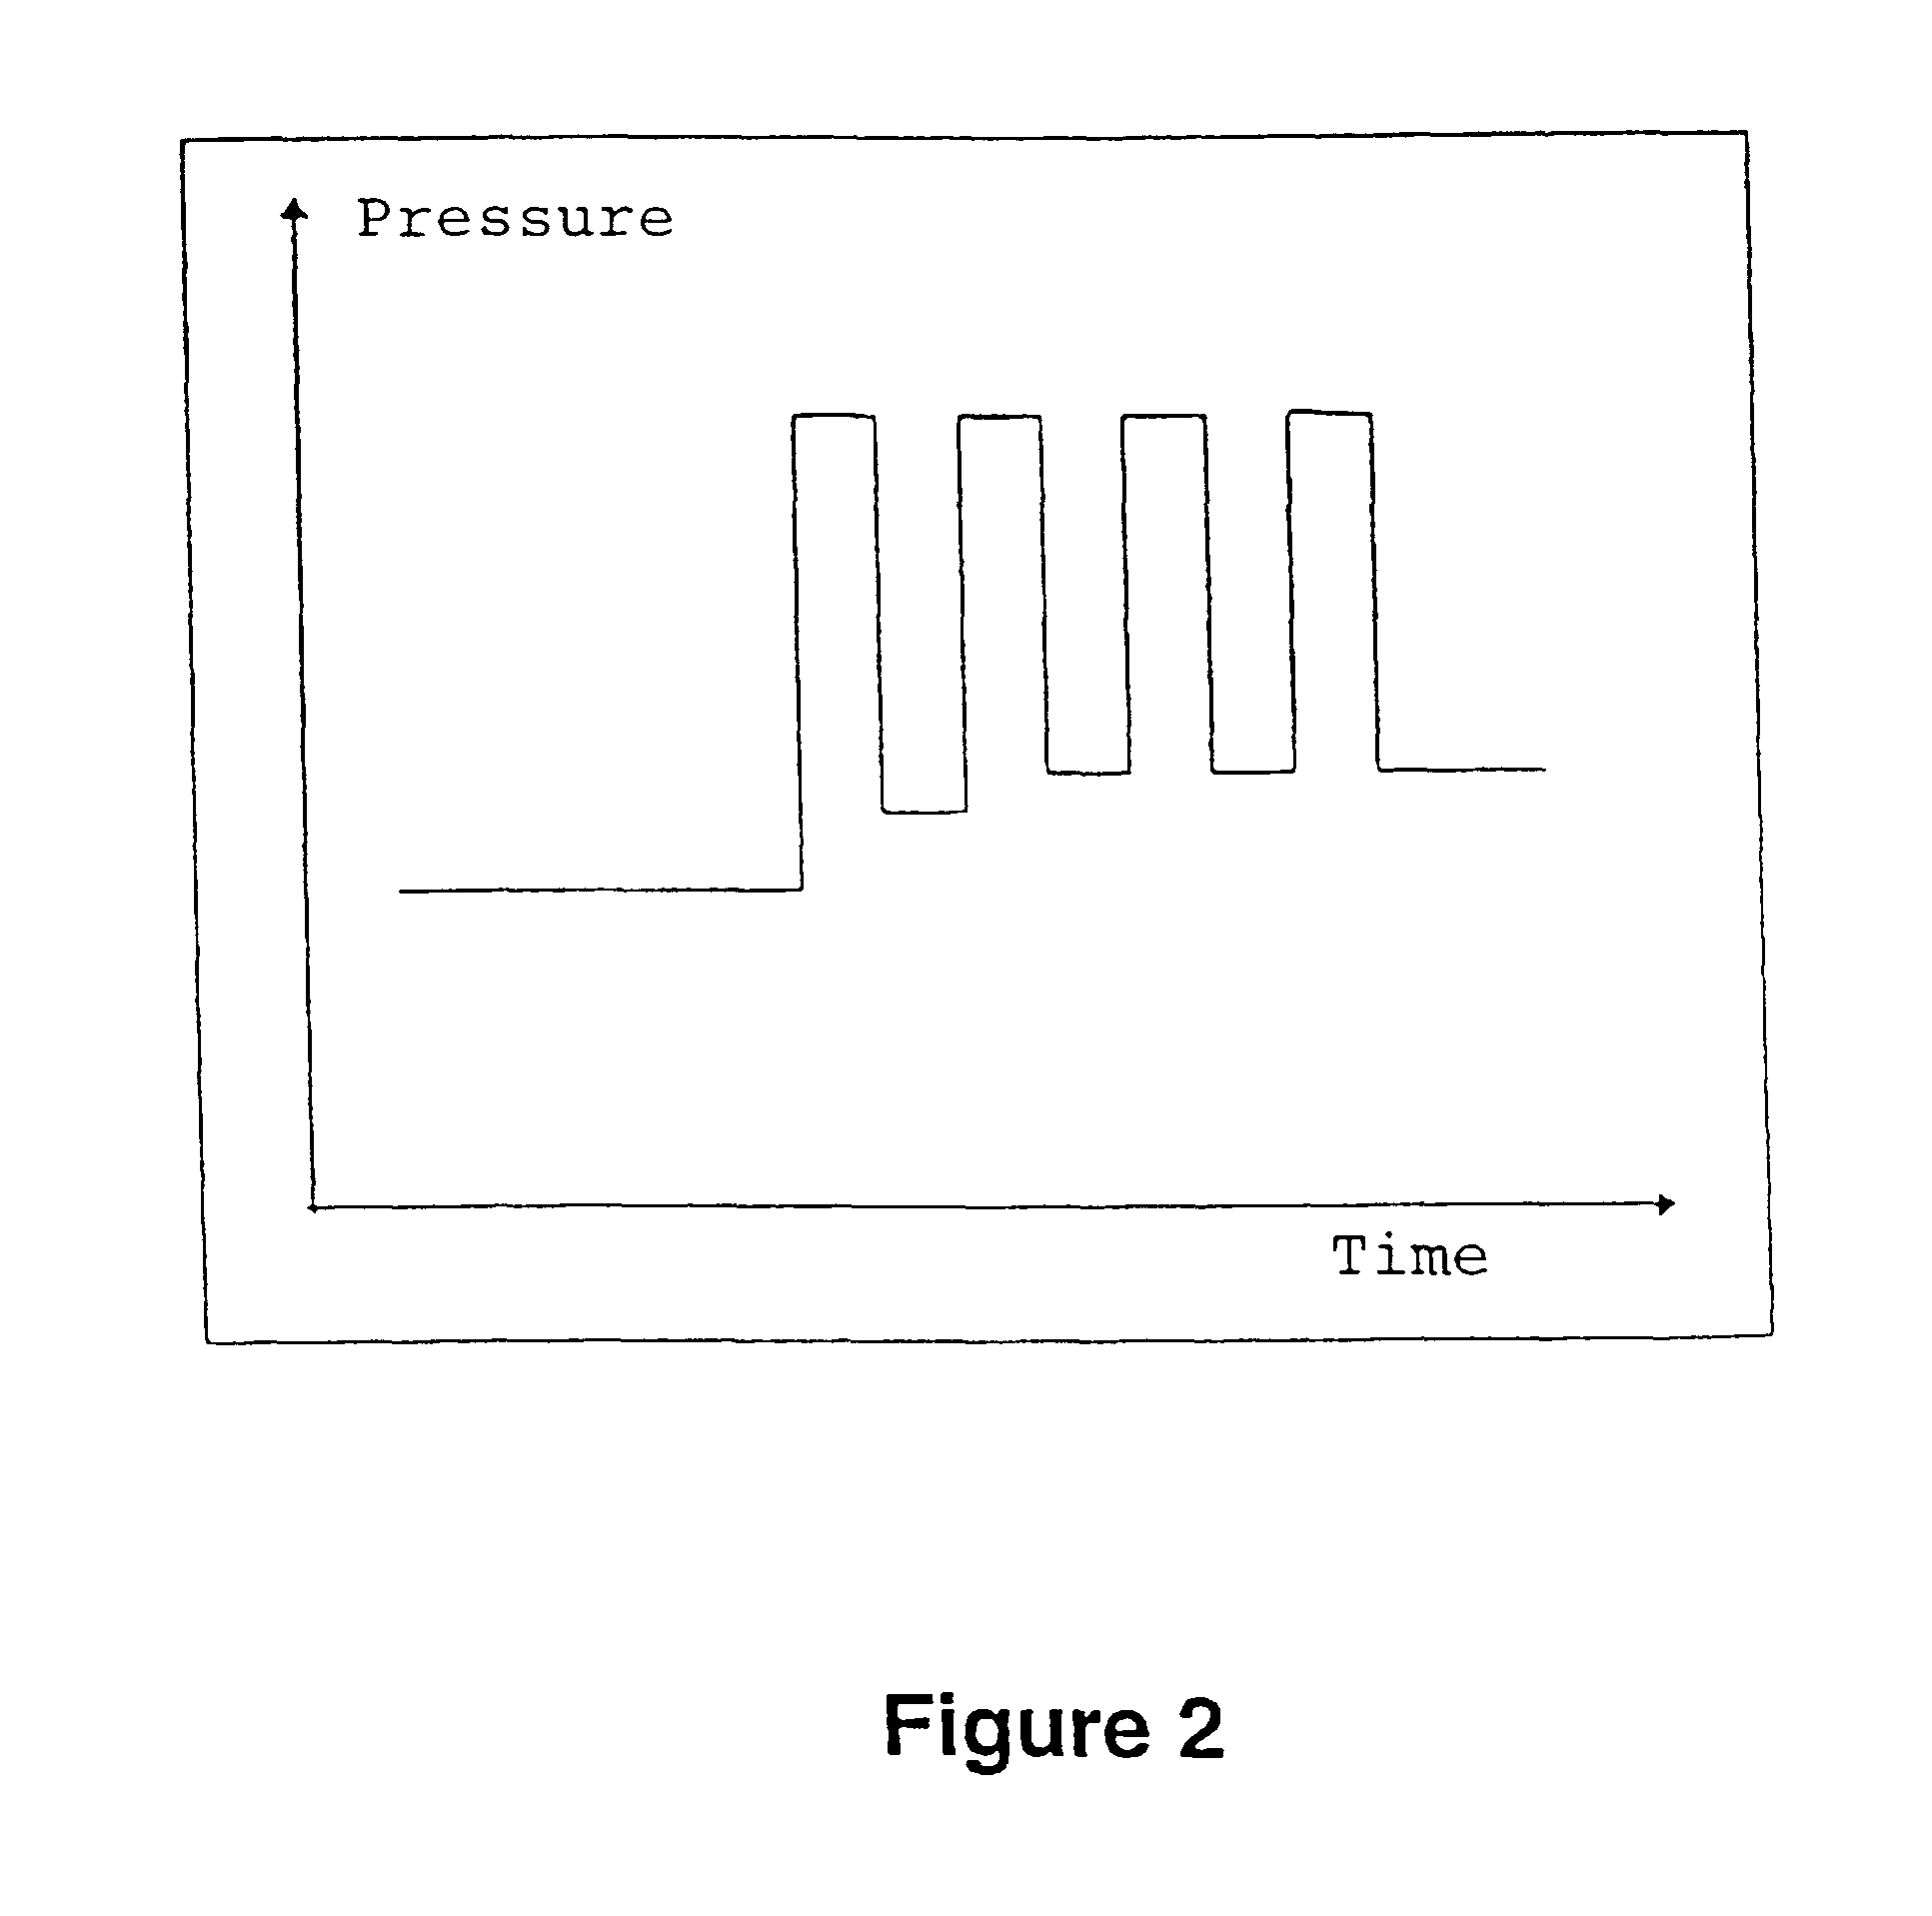 Method for weighing electrodes in electric smelting furnaces